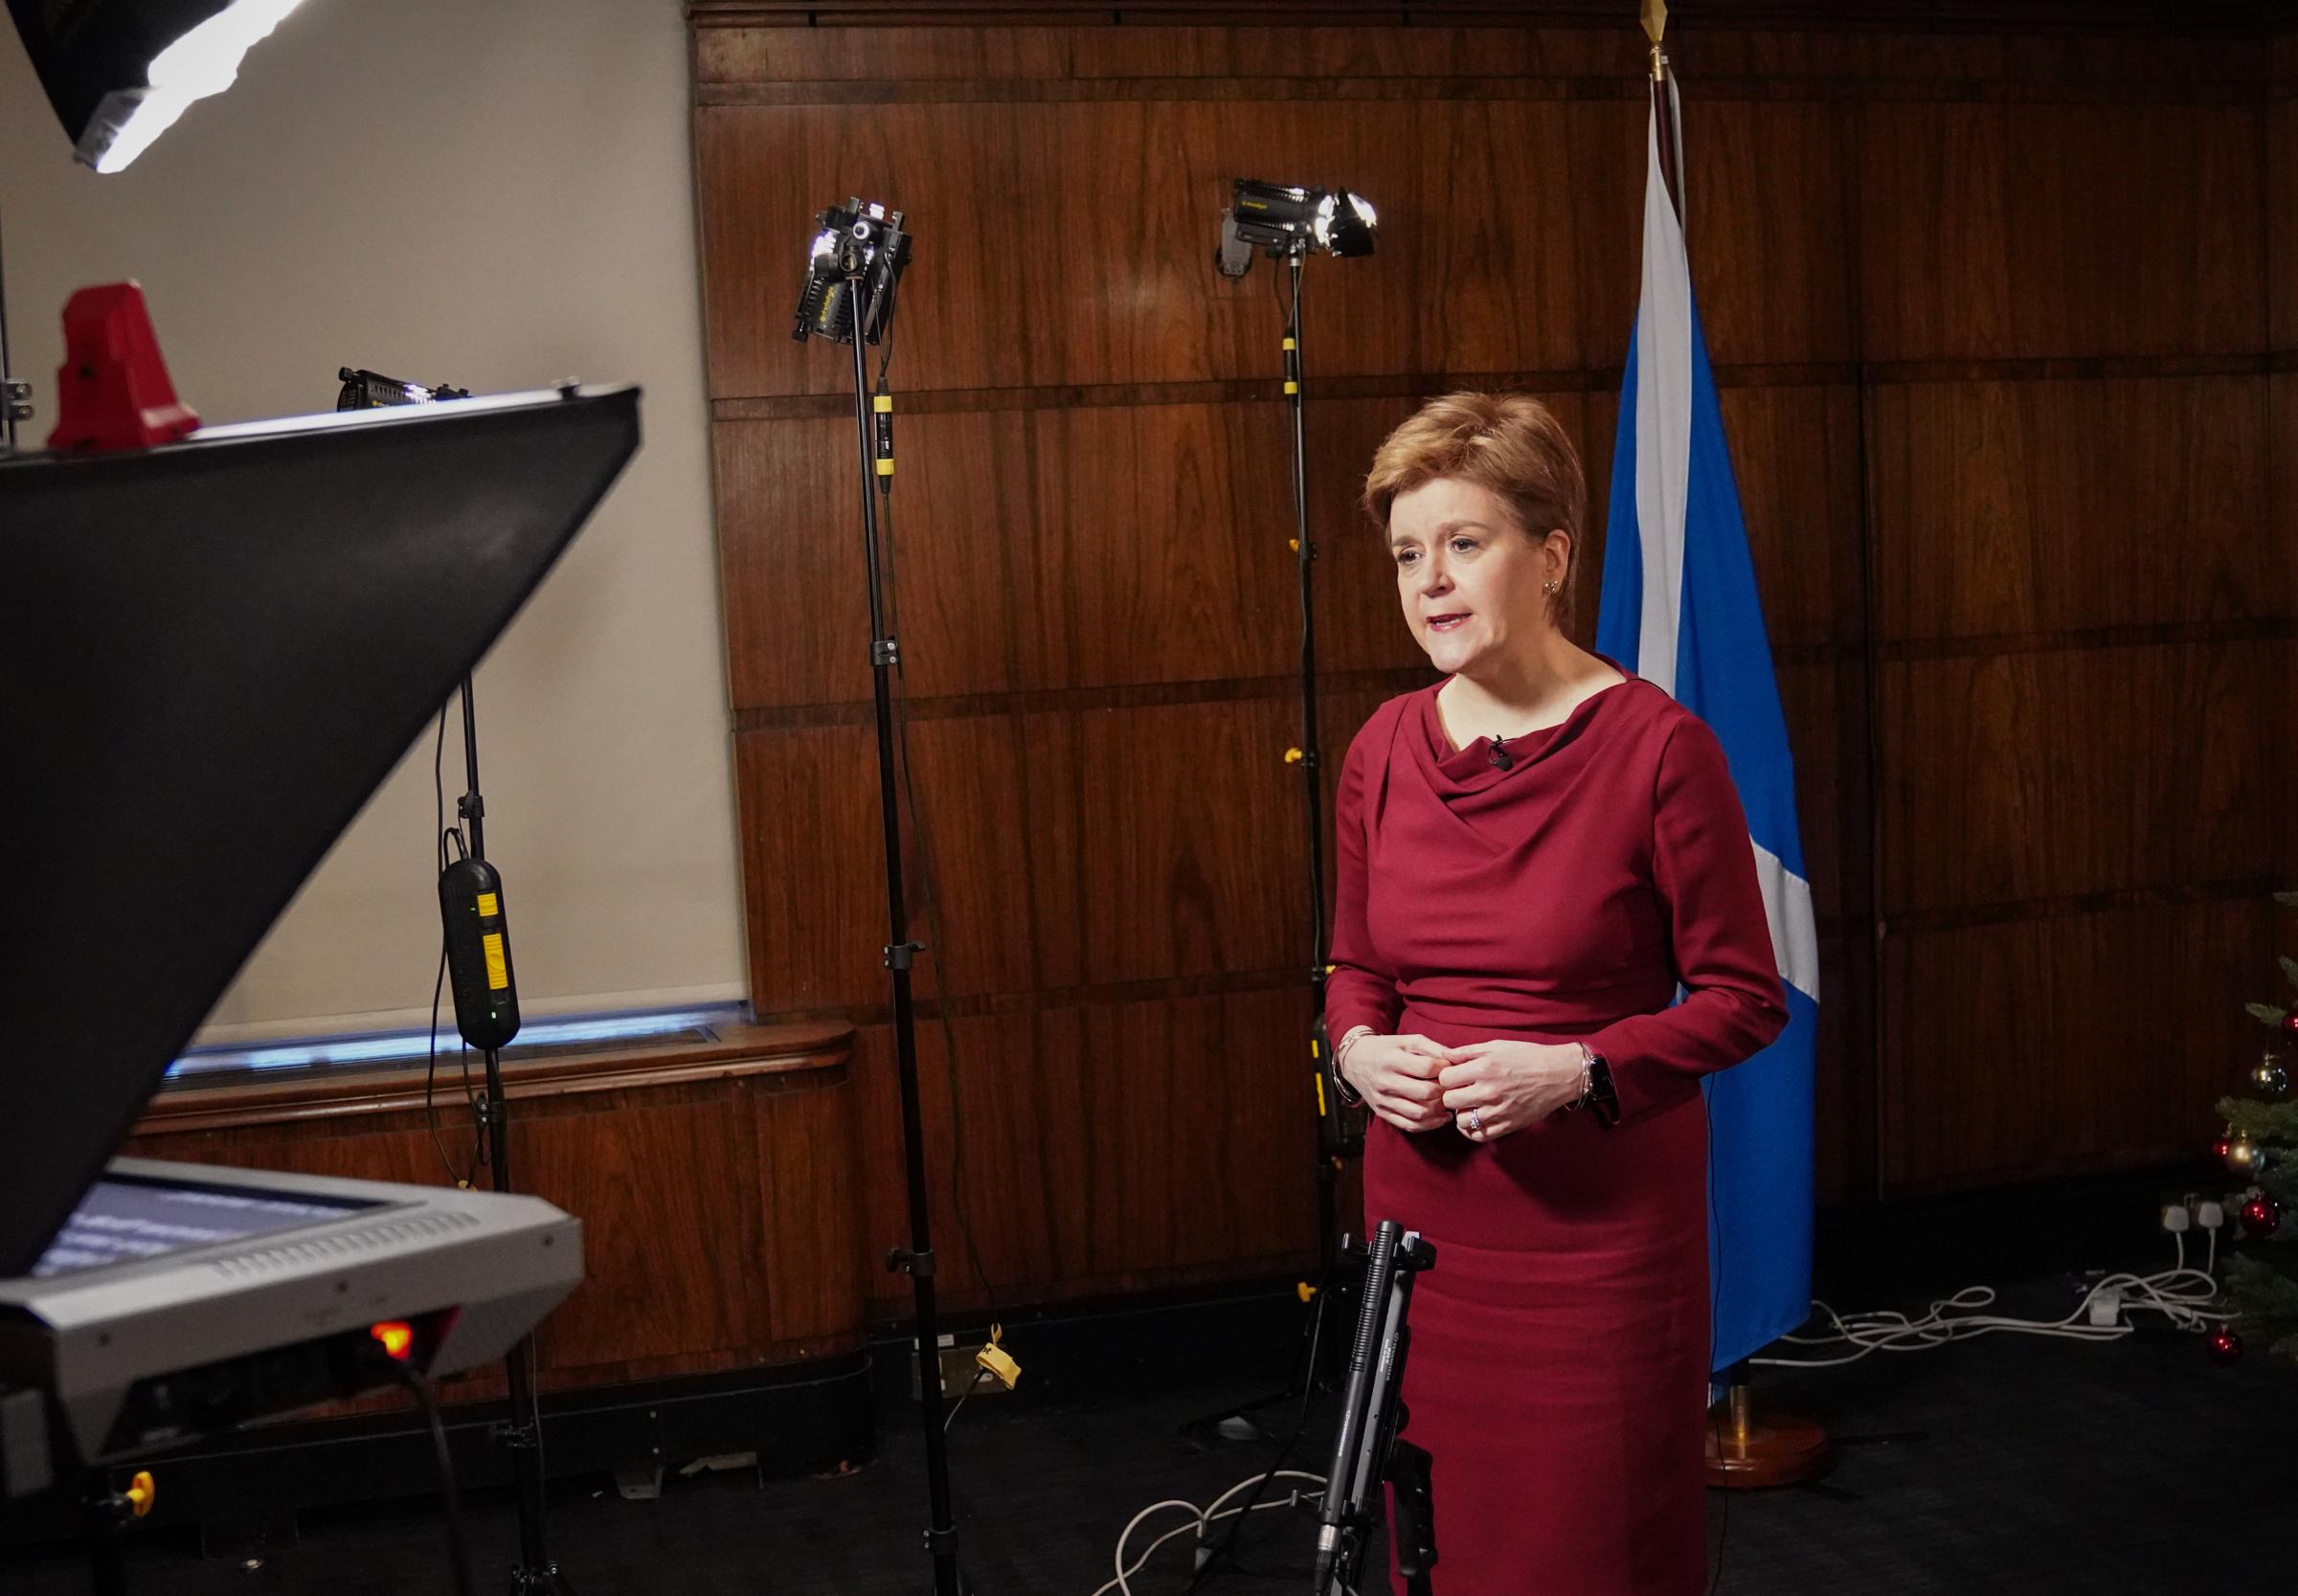 Nicola Sturgeon tells US media Scottish Government intends to hold indyref2 in 2023